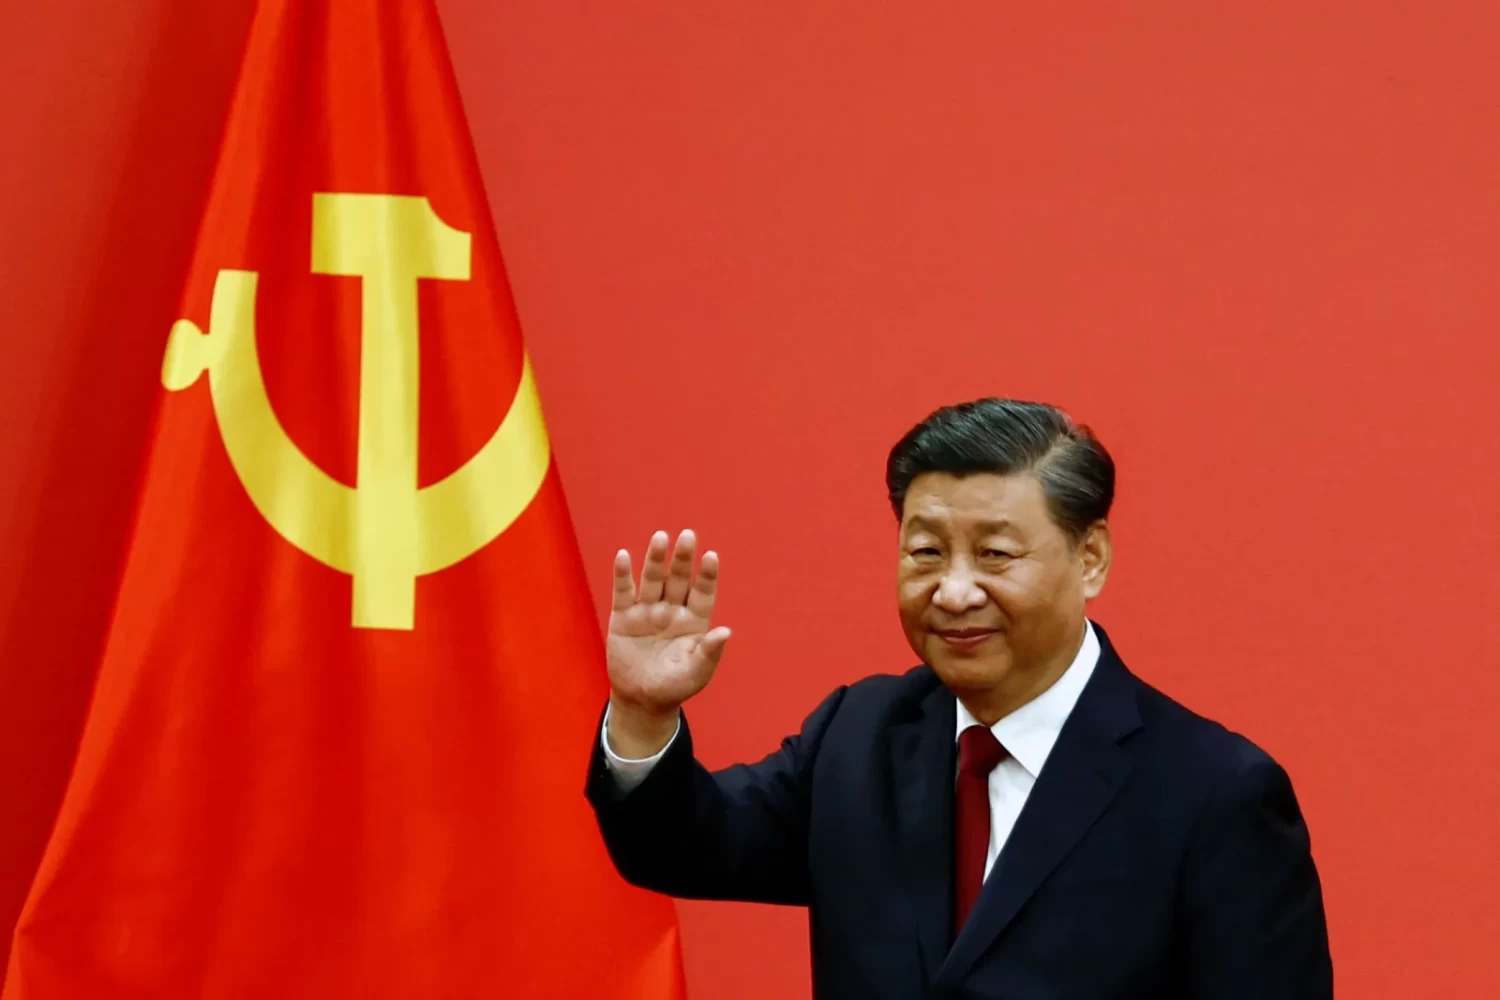 ‘A nation at risk’: Has Chinese leader Xi Jinping bitten off more than he can chew?